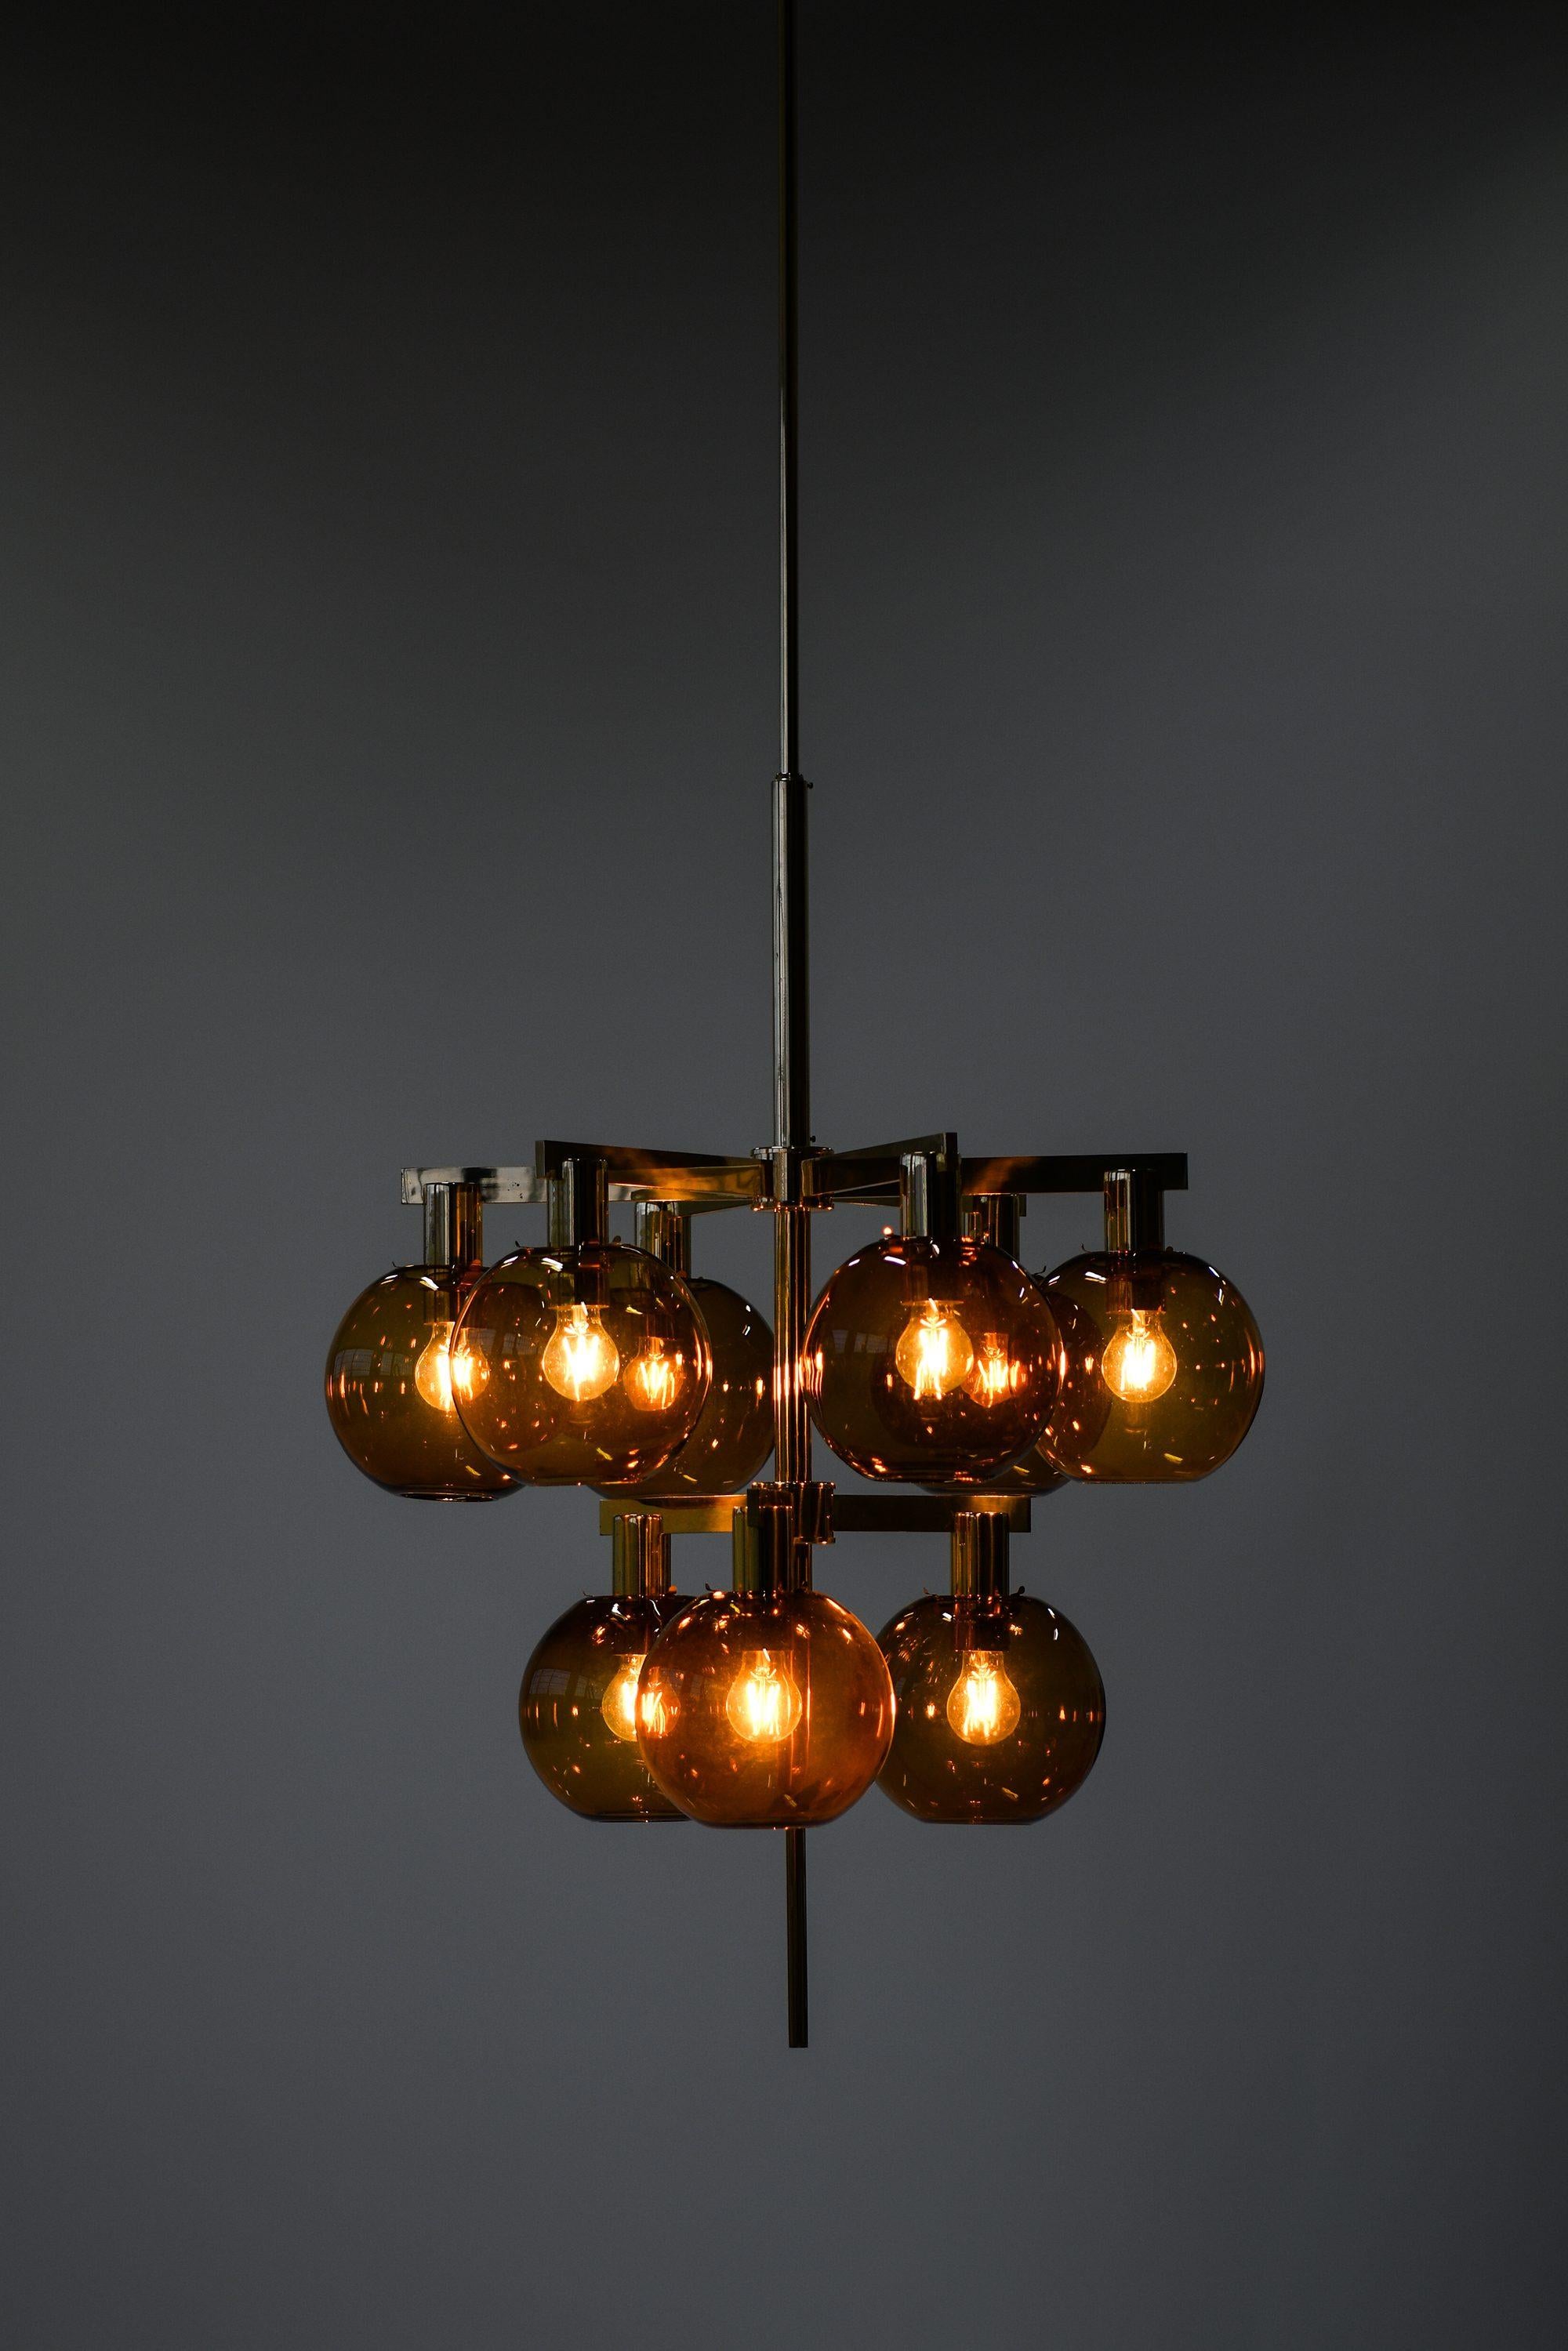 Ceiling Lamp Chandelier in Brass and Amber Glass by Hans-Agne Jakobsson, 1950's For Sale 3